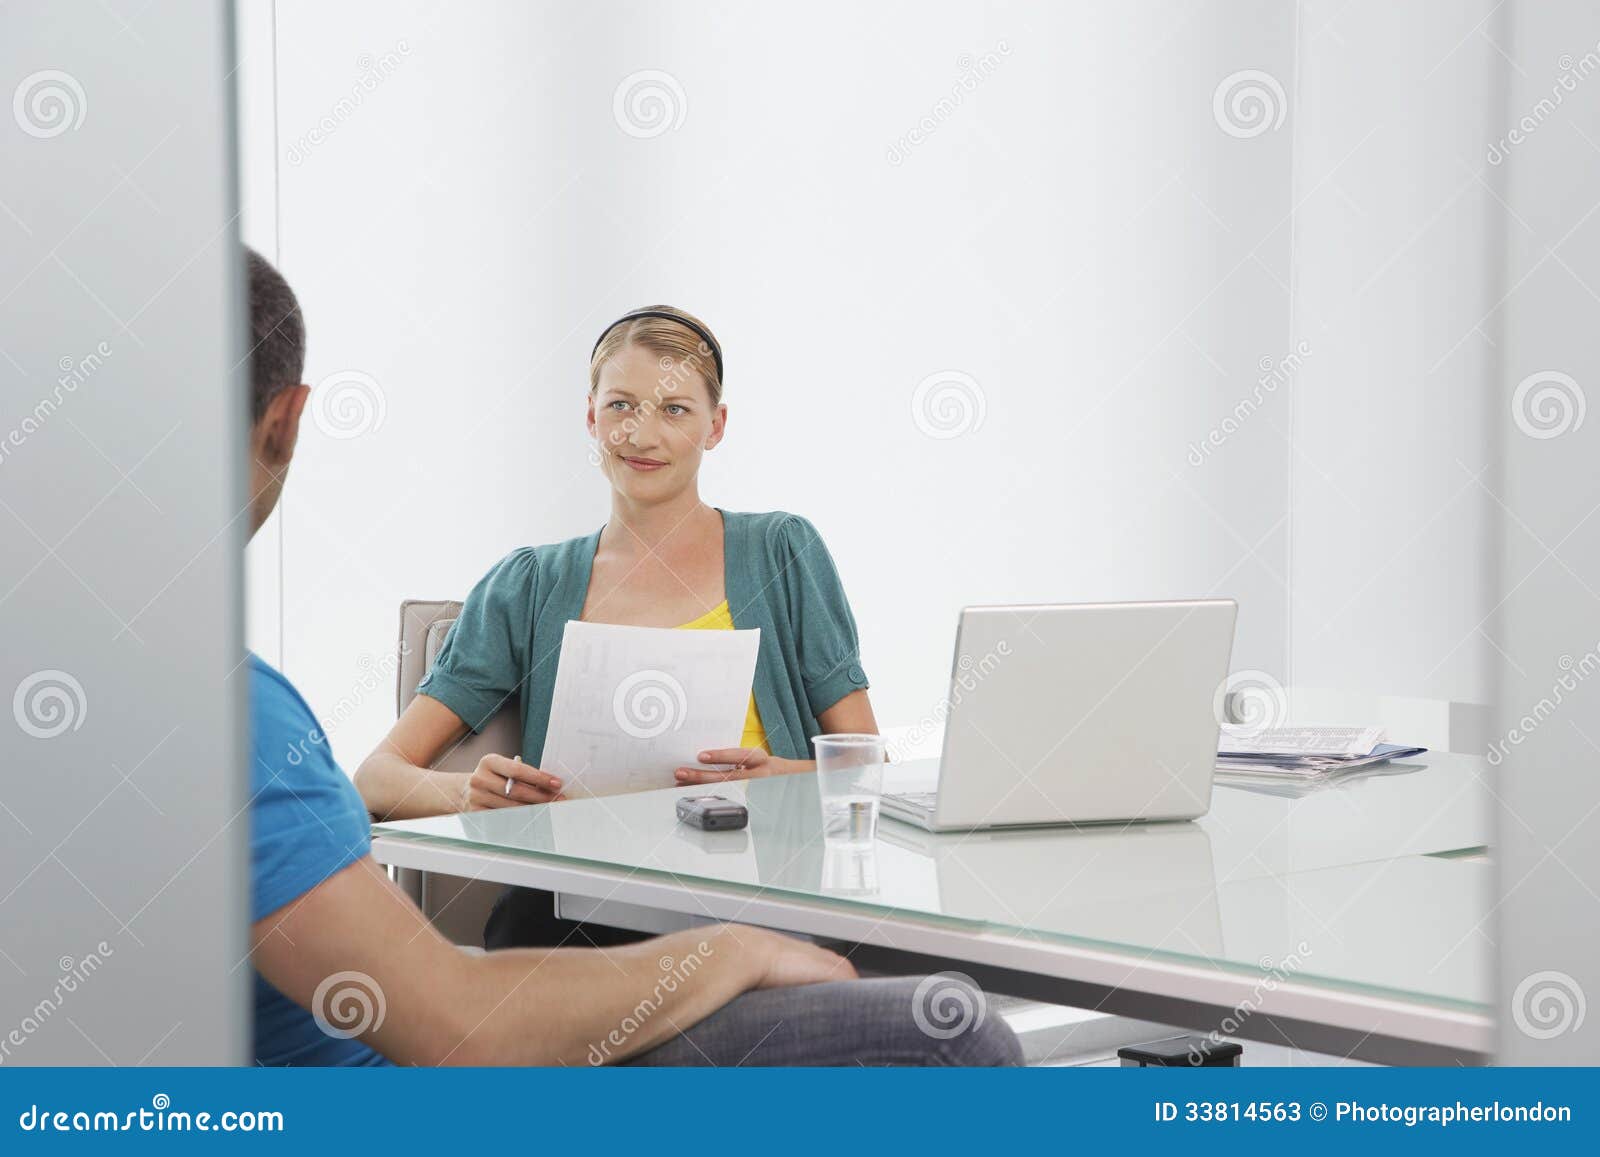 woman talking to cropped colleague in office